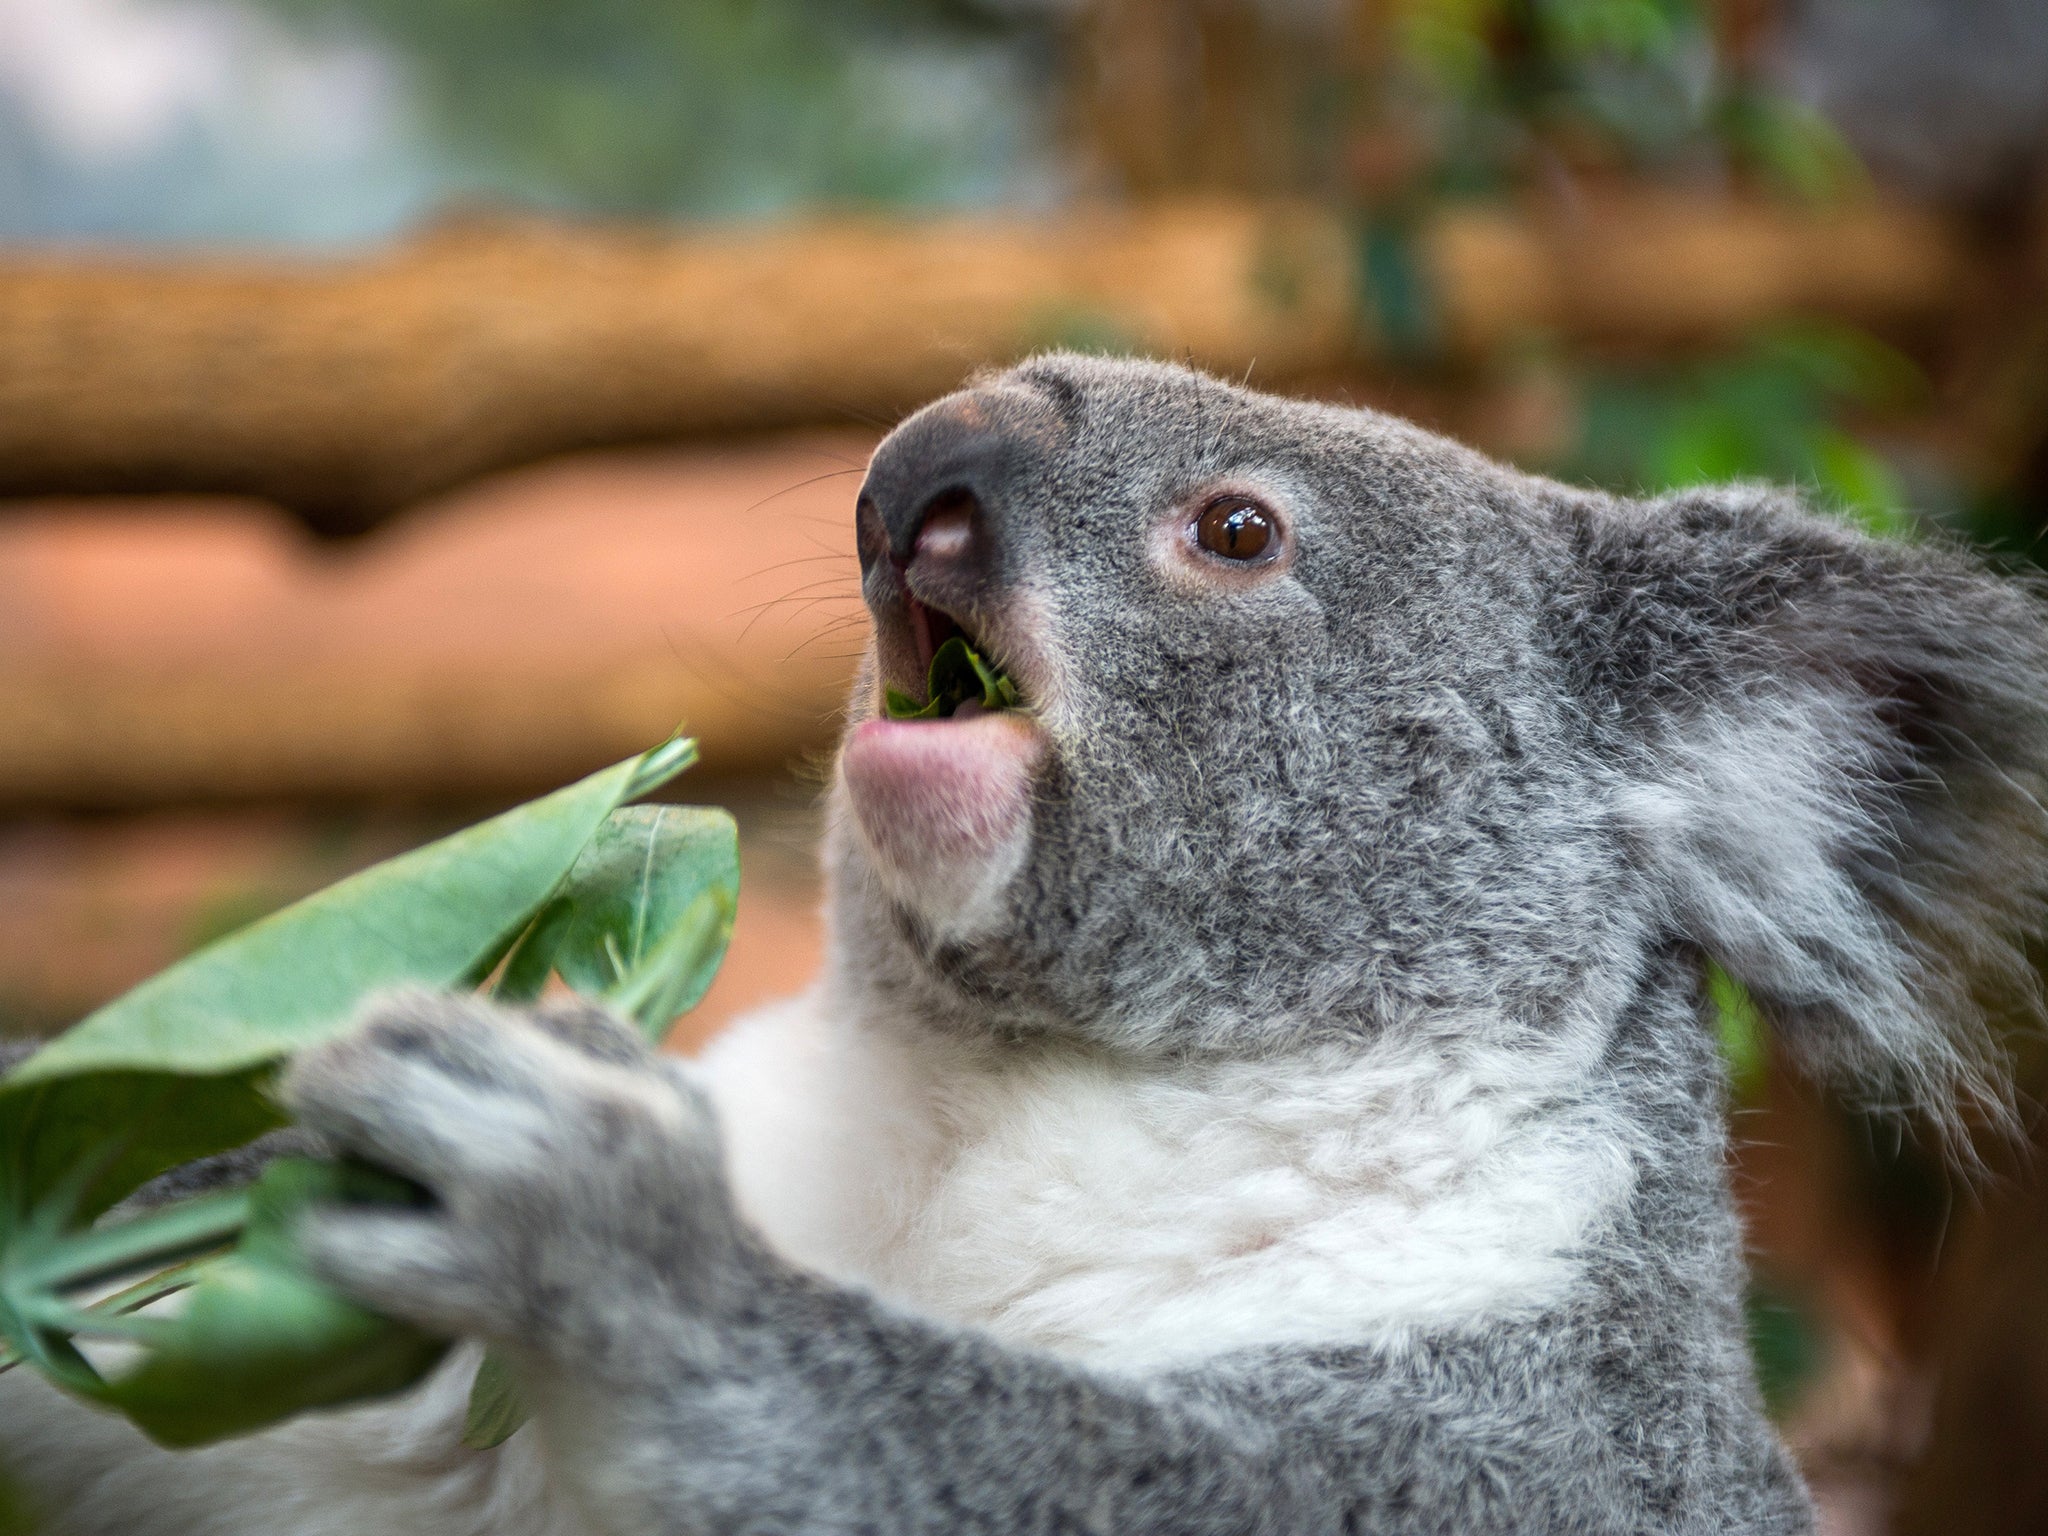 Conservation groups have appealed for cotton mittens for koalas